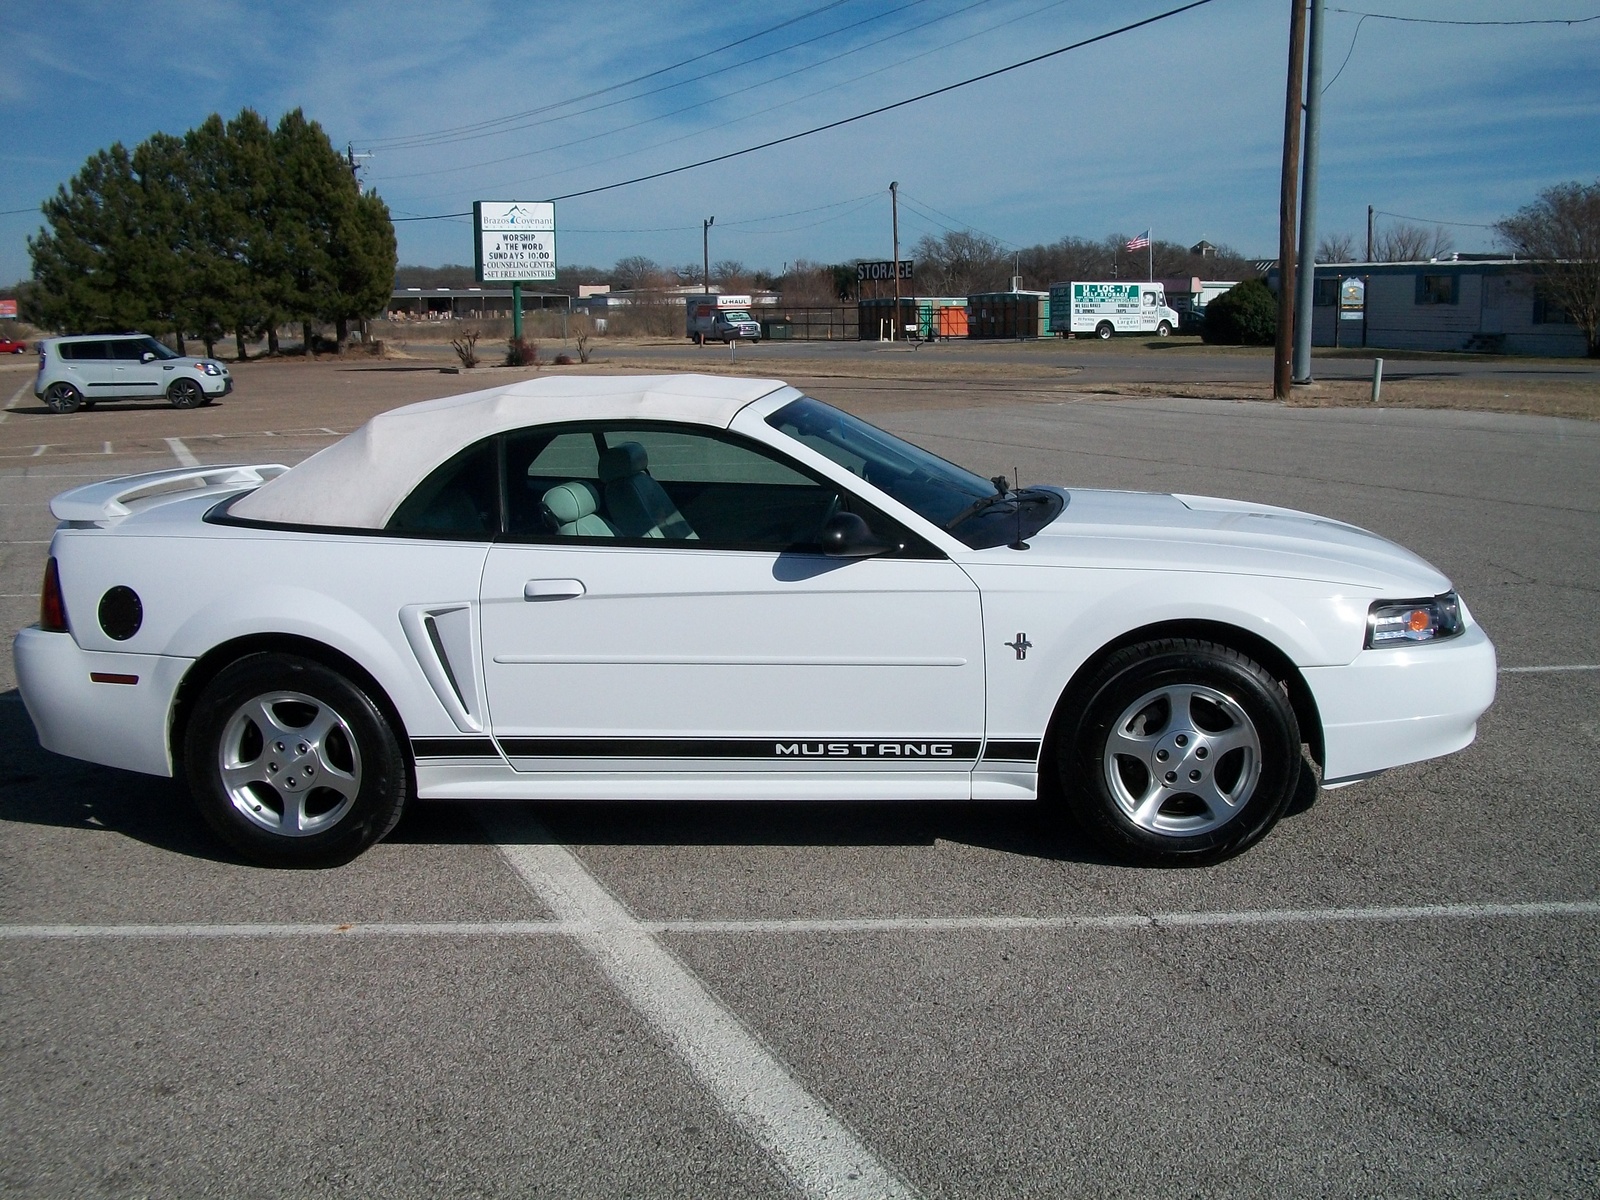 2002 Ford mustang deluxe convertible #6